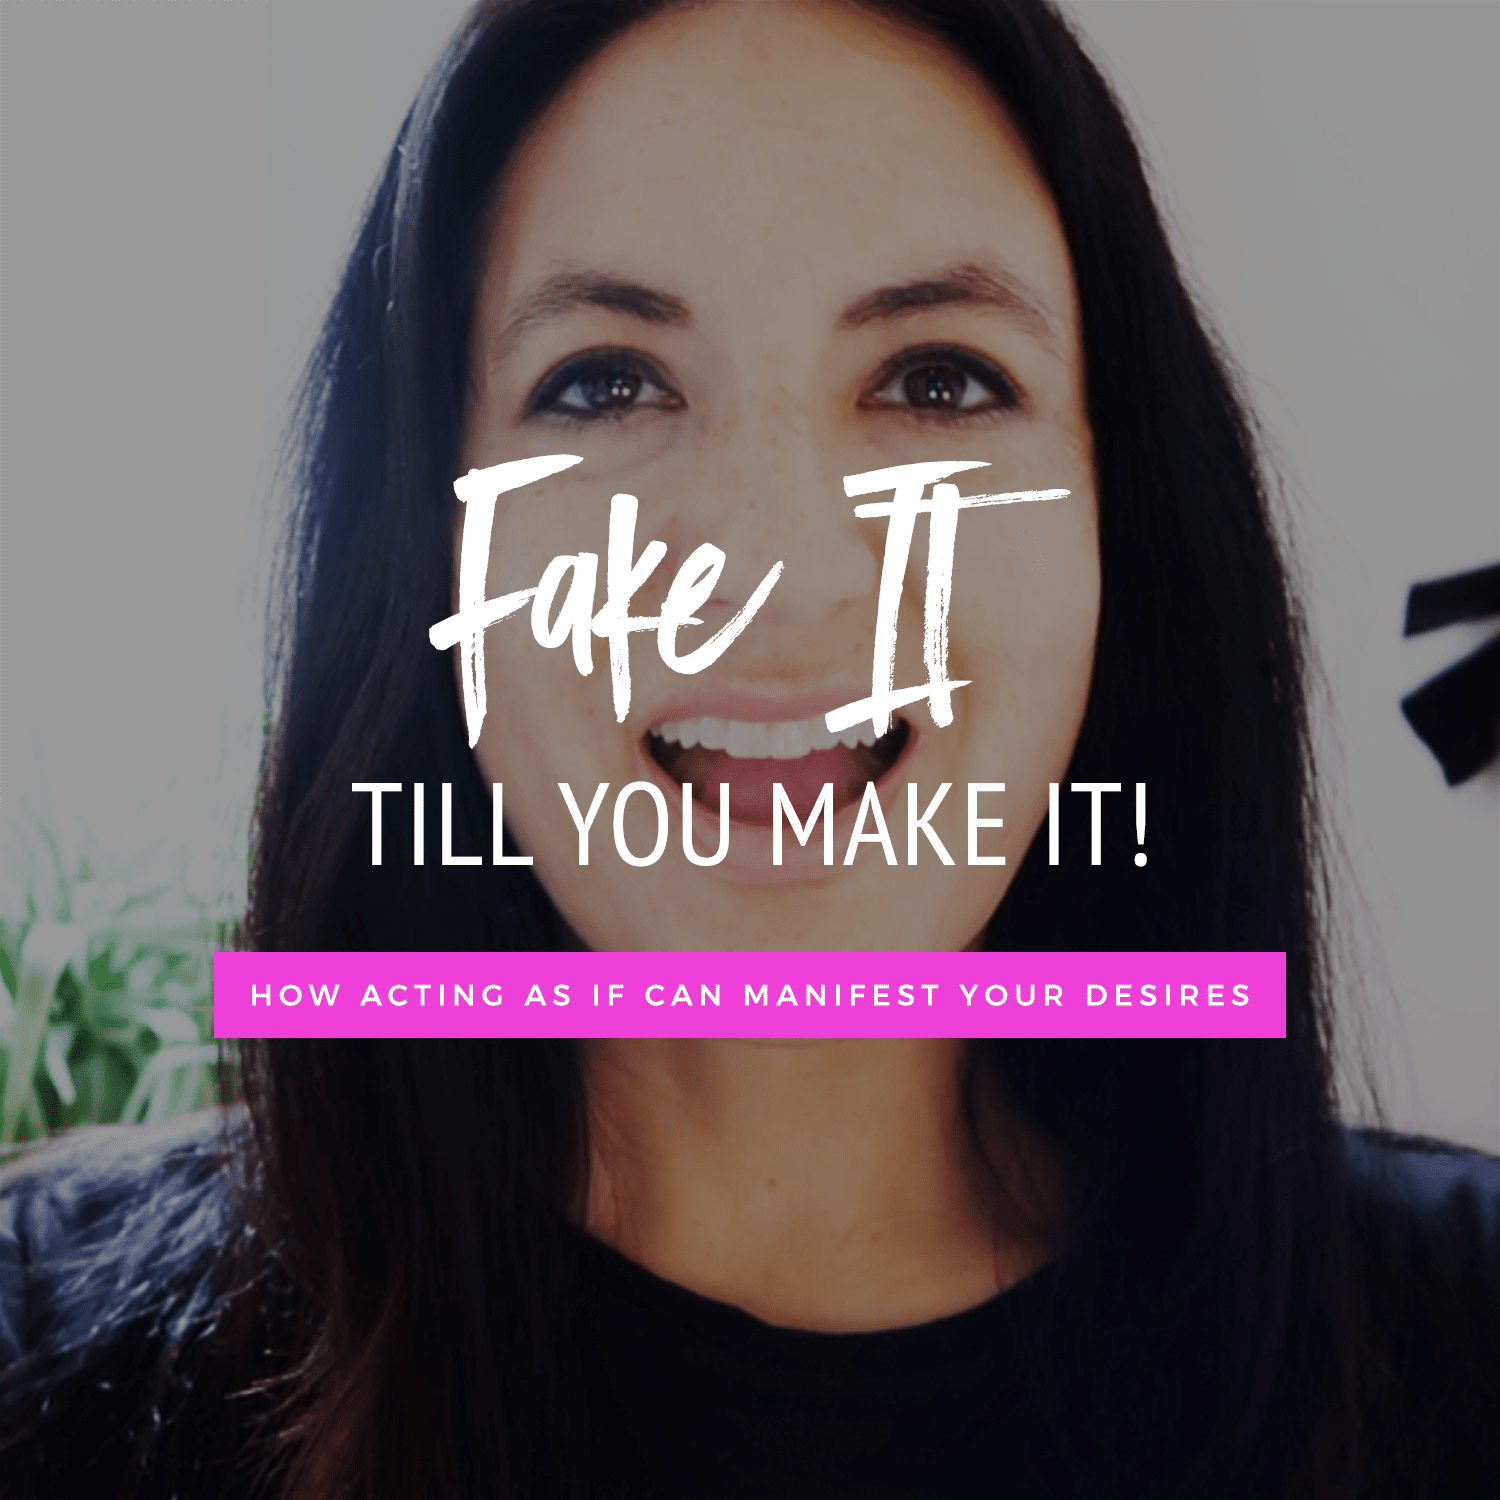 Fake It Till You Make It! How Acting As If Can Manifest Your Desires